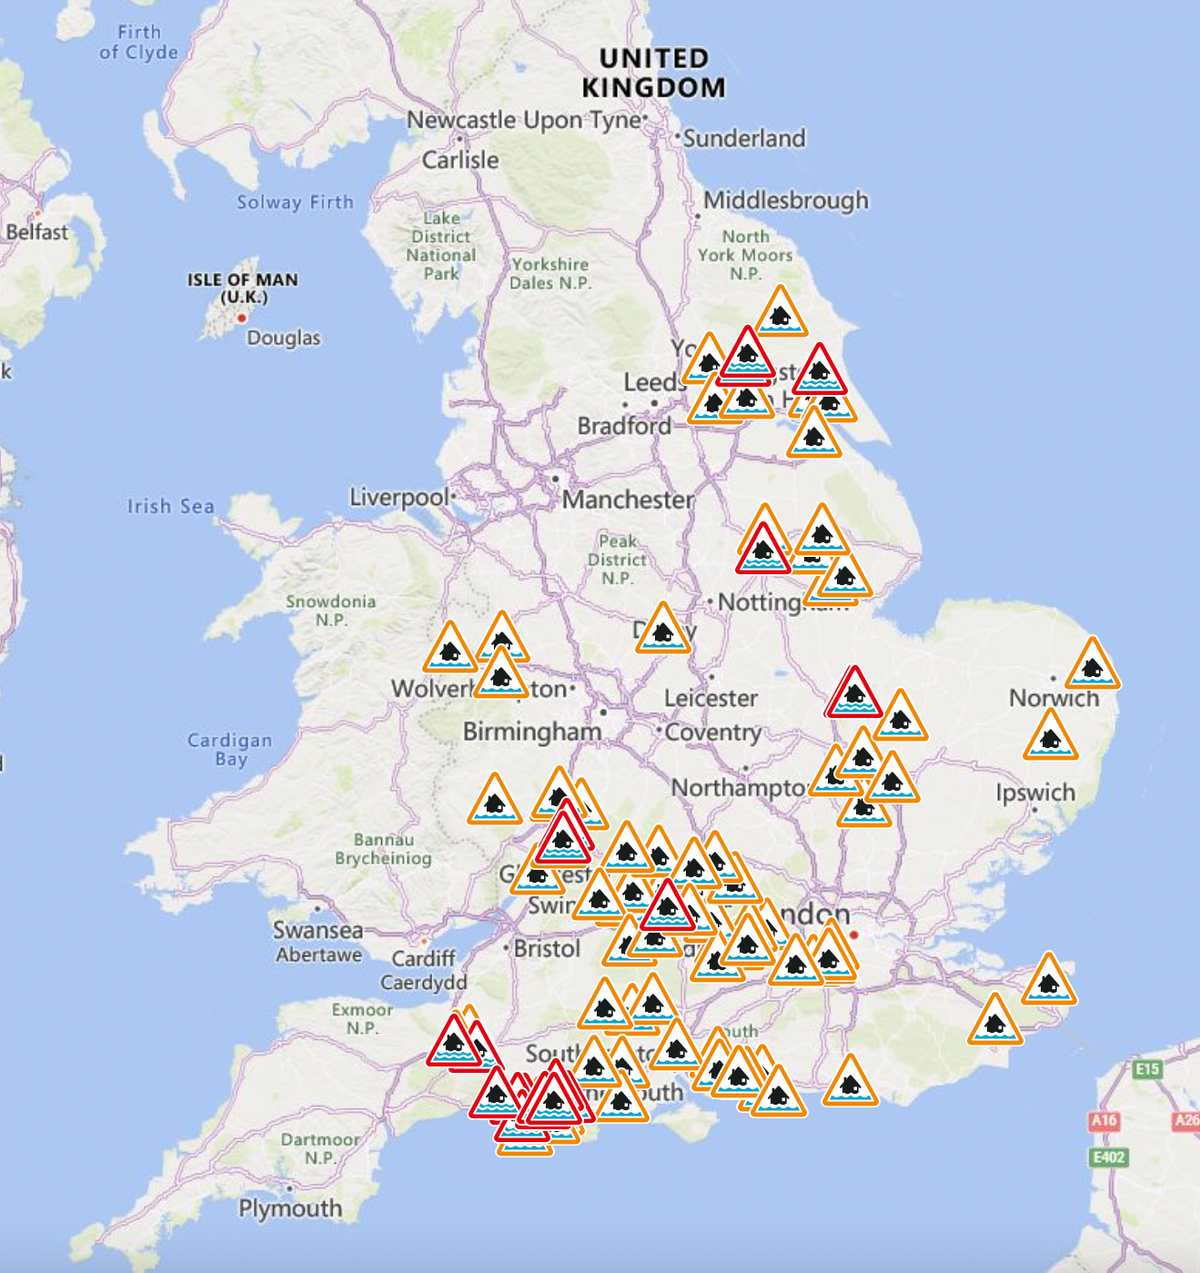 There are 20 flood warnings and 84 flood alerts in place across the UK (The Environment Agency)